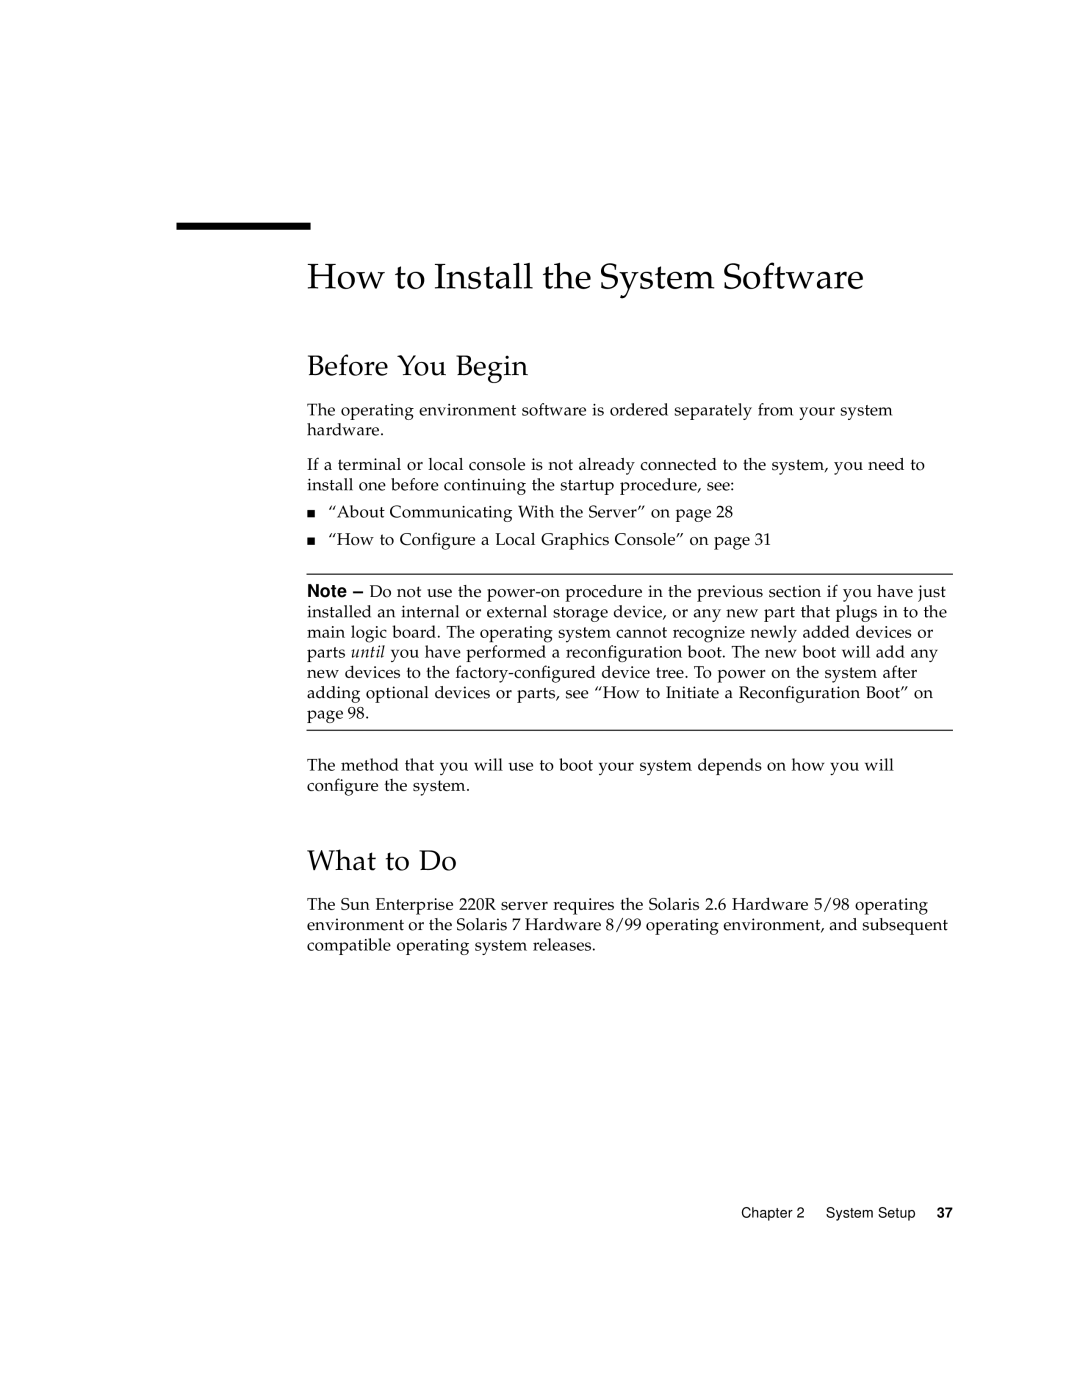 Sun Microsystems 220R manual How to Install the System Software, Before You Begin, What to Do 